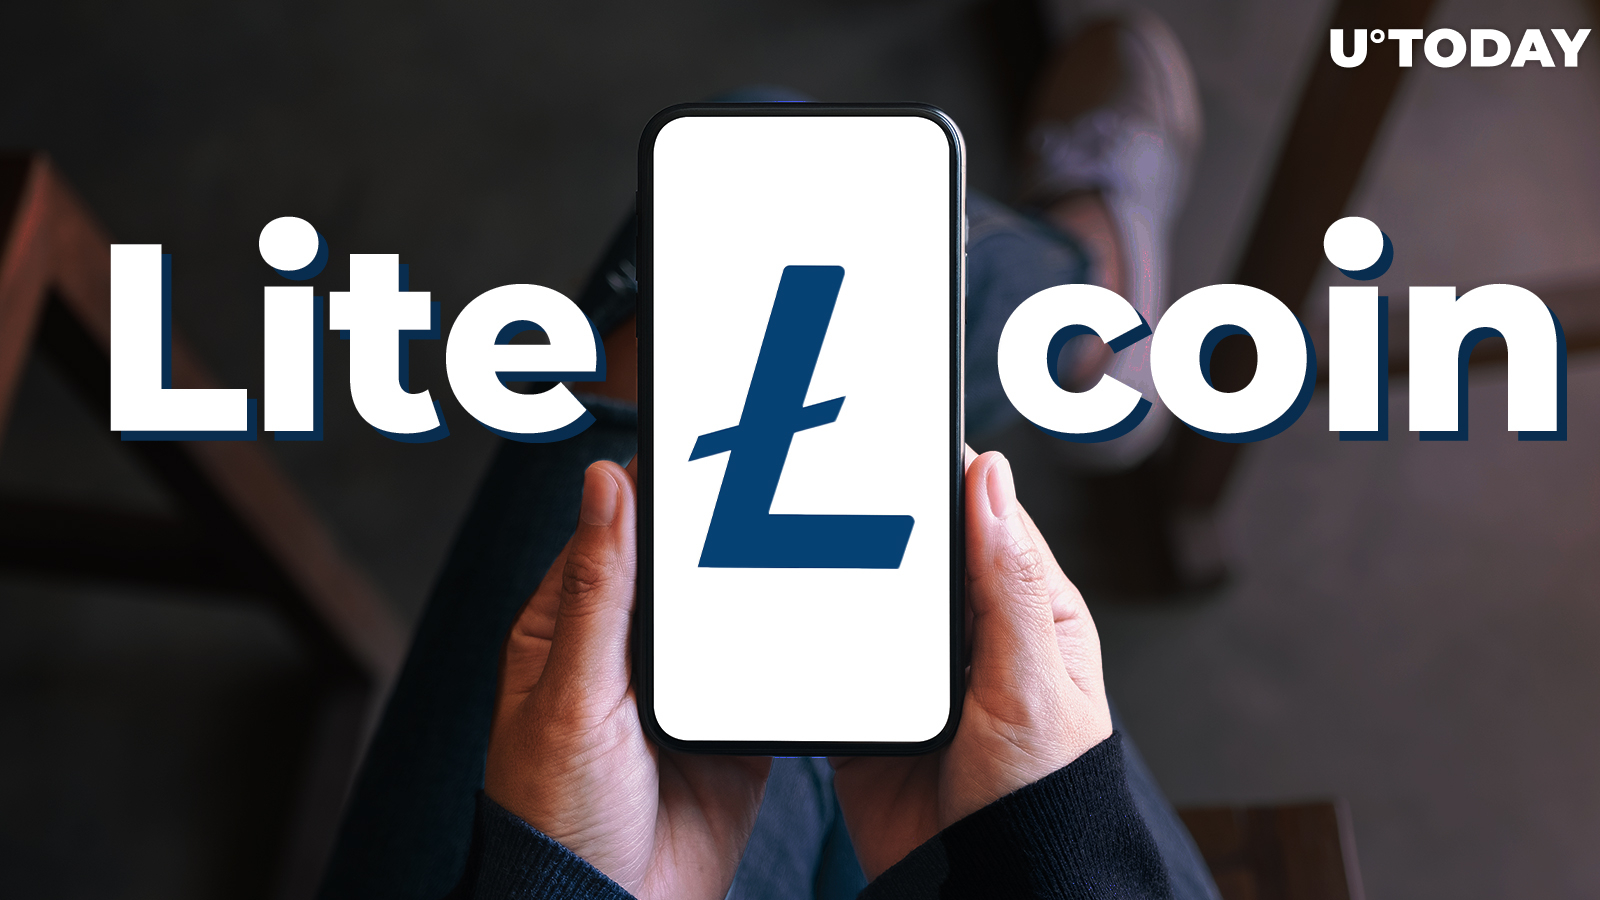 Litecoin (LTC) Wraps up Exciting Quarter With Record 500,000 Daily Transactions